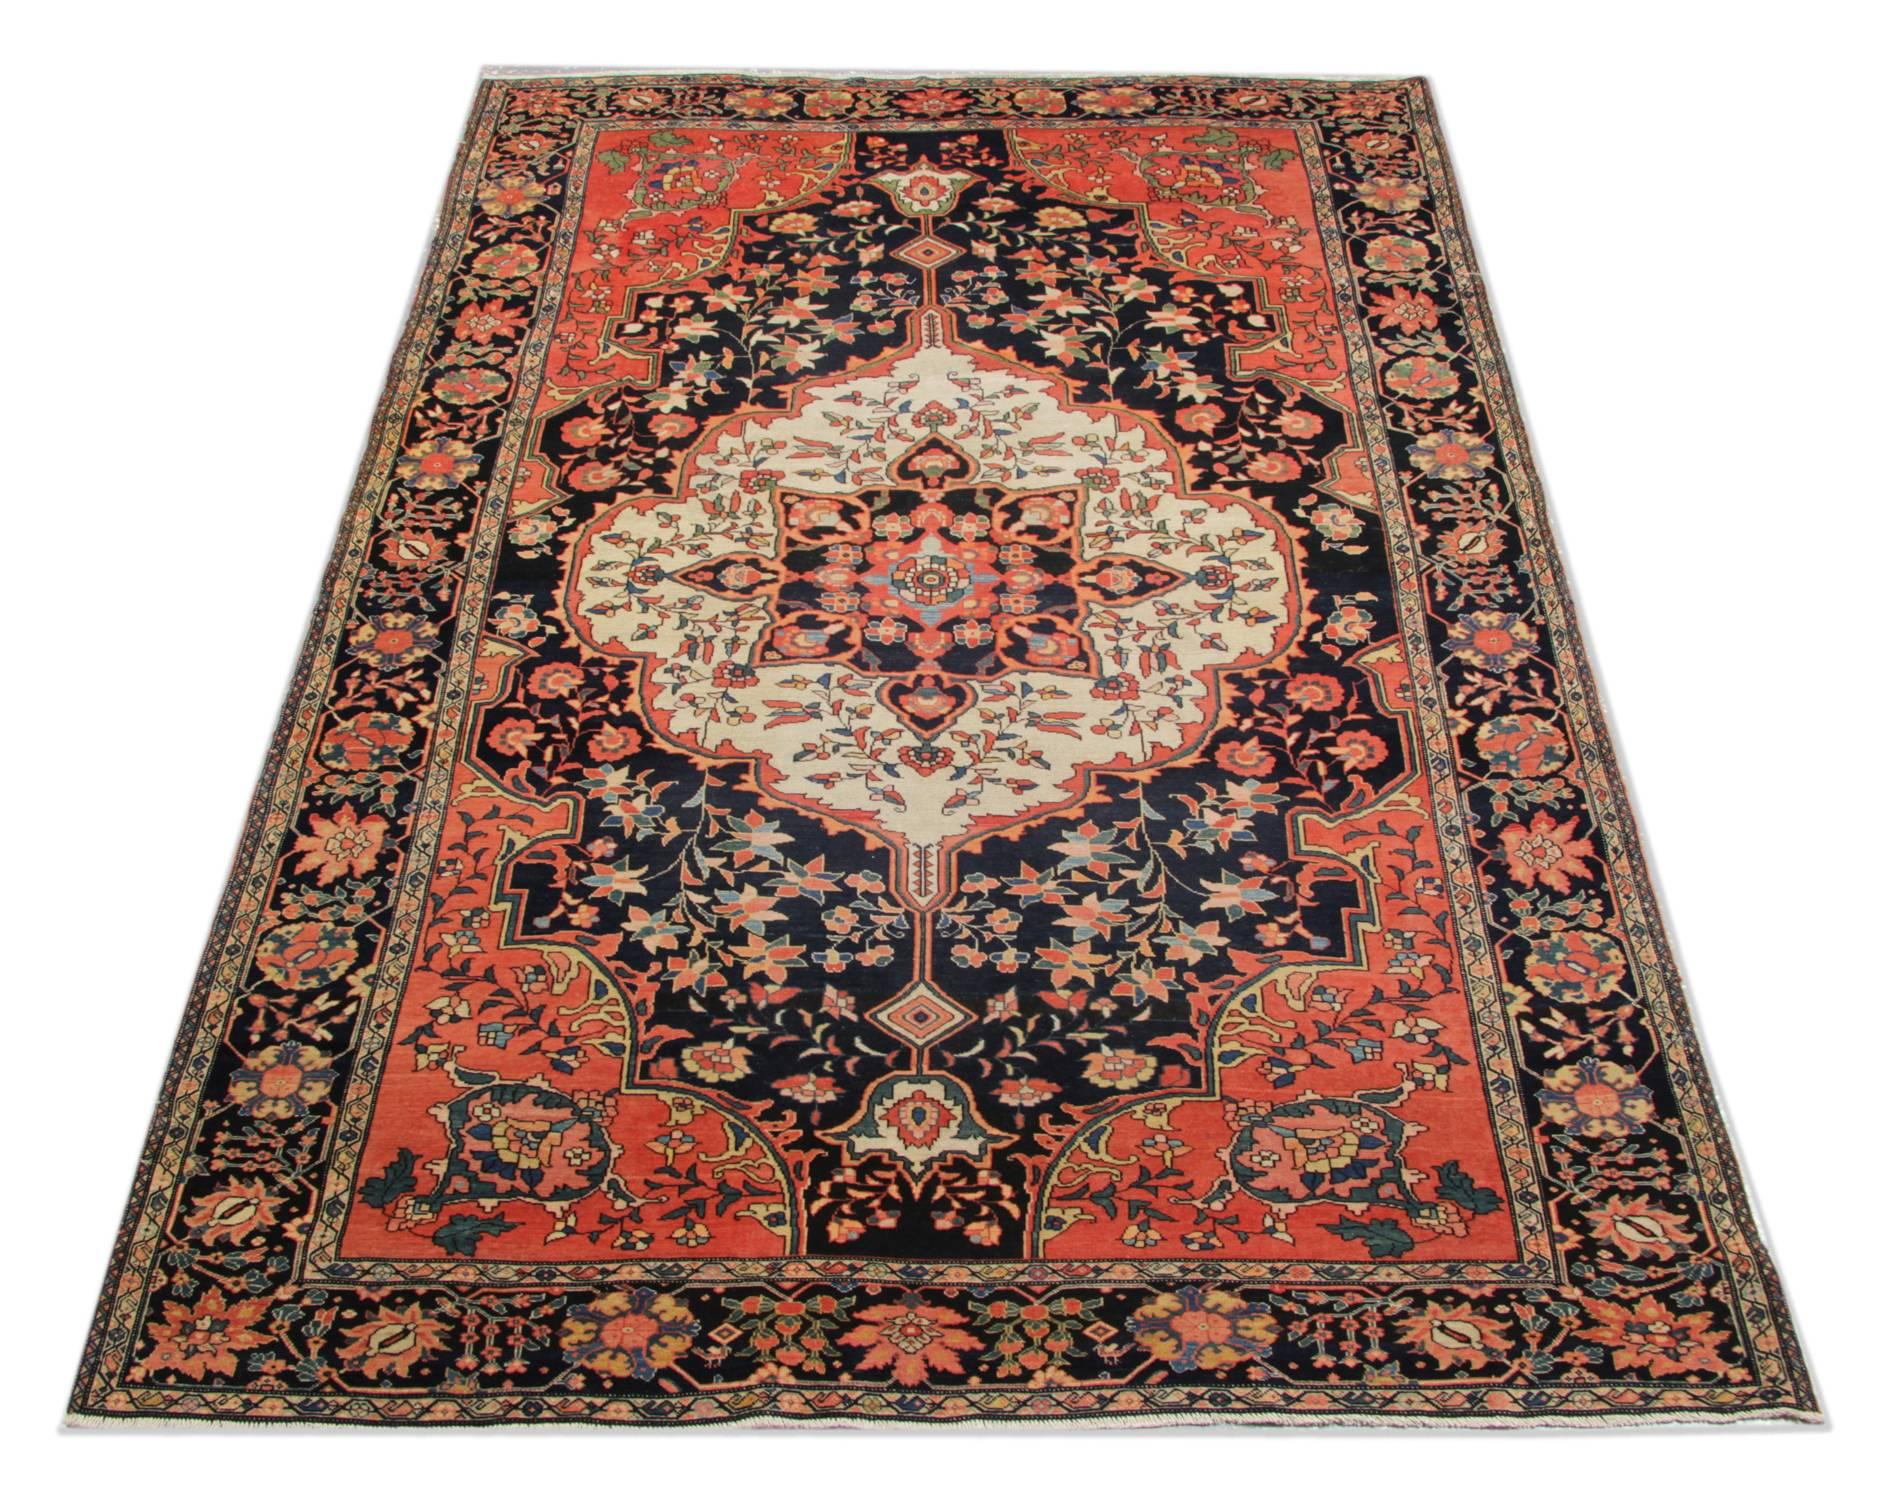 Feraghans were made between the 1870s-1913s from a region north of the town of Arak, produced for the Persian aristocracy. They are single weft, long and narrow or room-sized carpets, typically with an all-over herati design or floral and curling